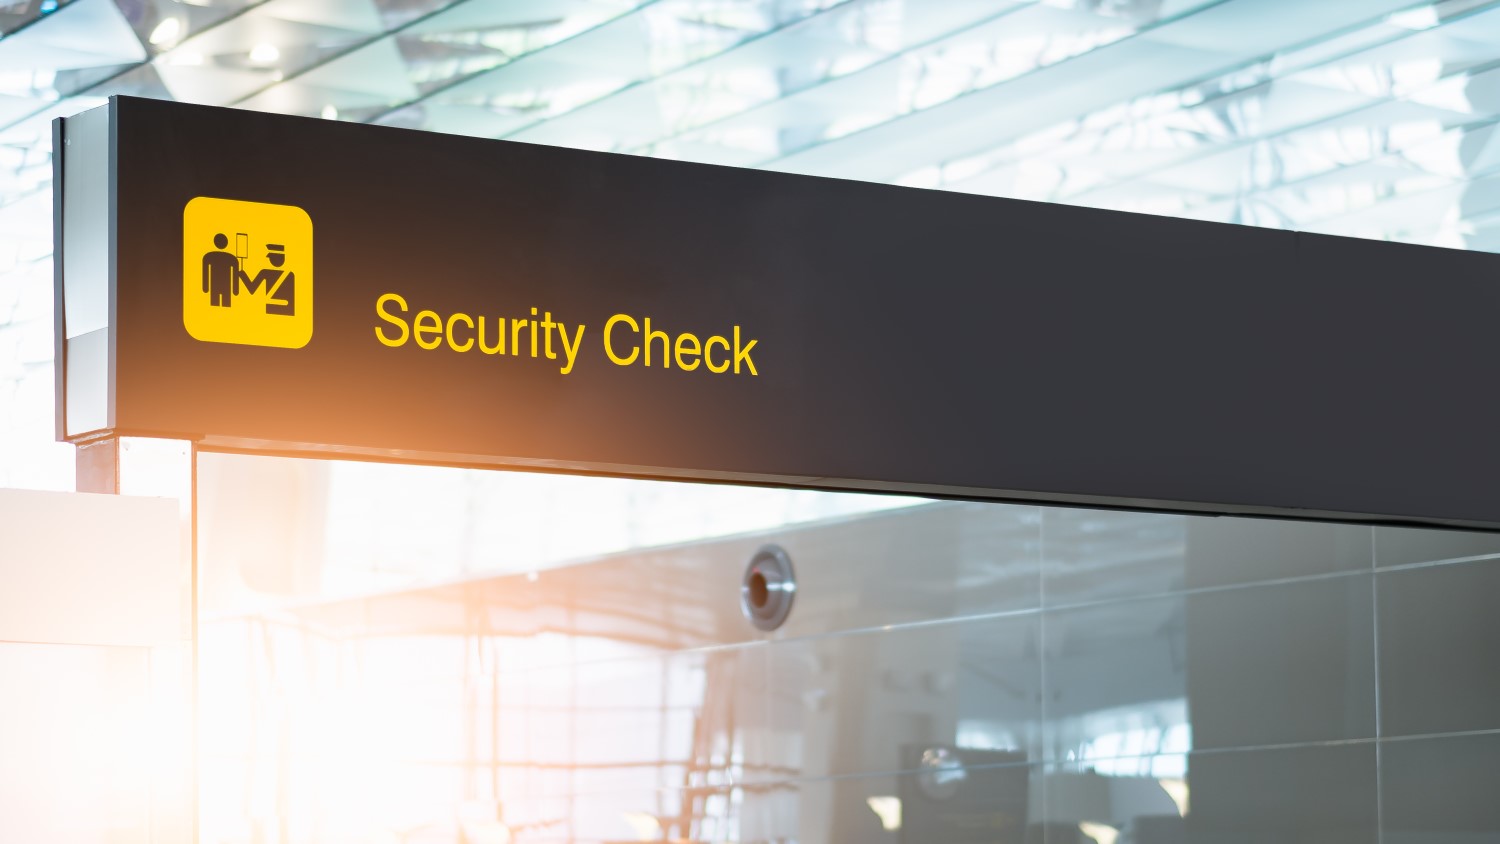 BA-Backed Firm Raises $5 Million To Put Airline Security On A Blockchain